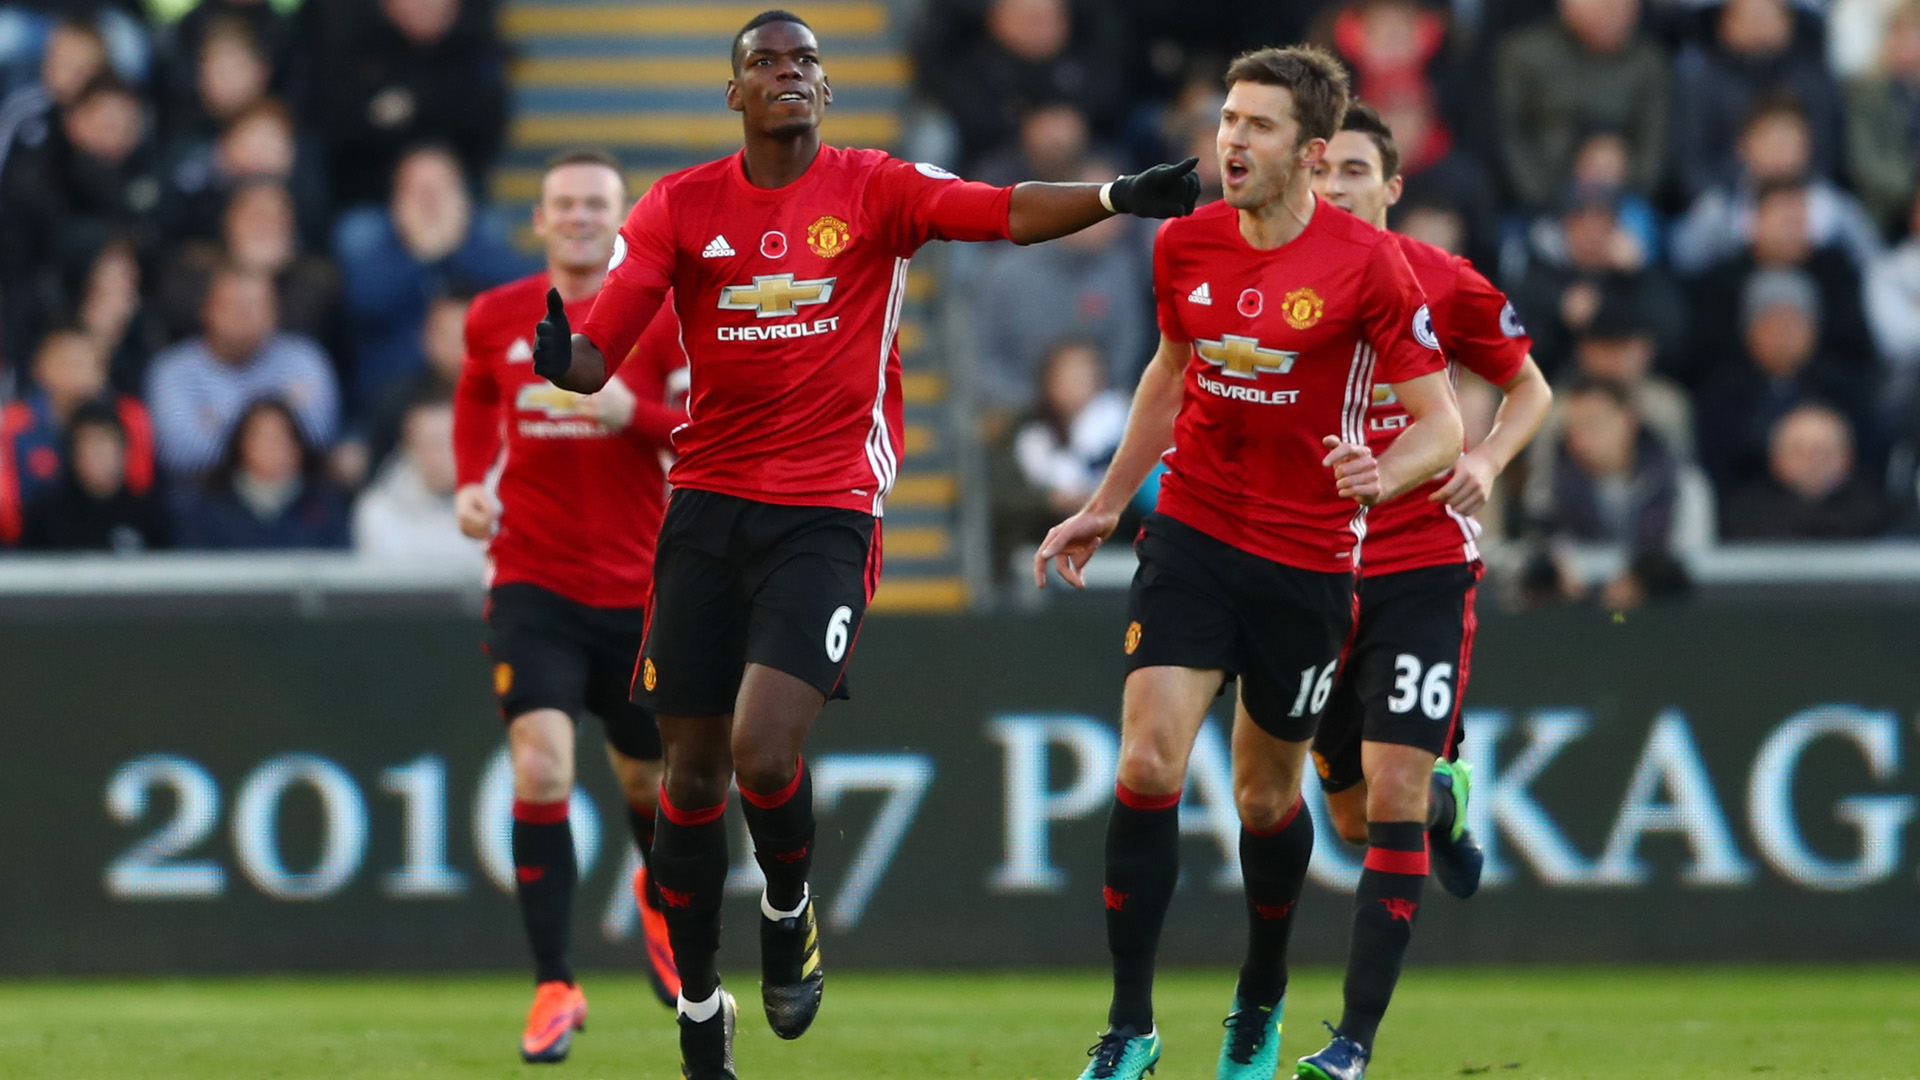 SWANSEA, WALES - NOVEMBER 06: Paul Pogba of Manchester United celebrates scoring his sides first goal with Michael Carrick during the Premier League match between Swansea City and Manchester United at Liberty Stadium on November 6, 2016 in Swansea, Wales.  (Photo by Michael Steele/Getty Images)